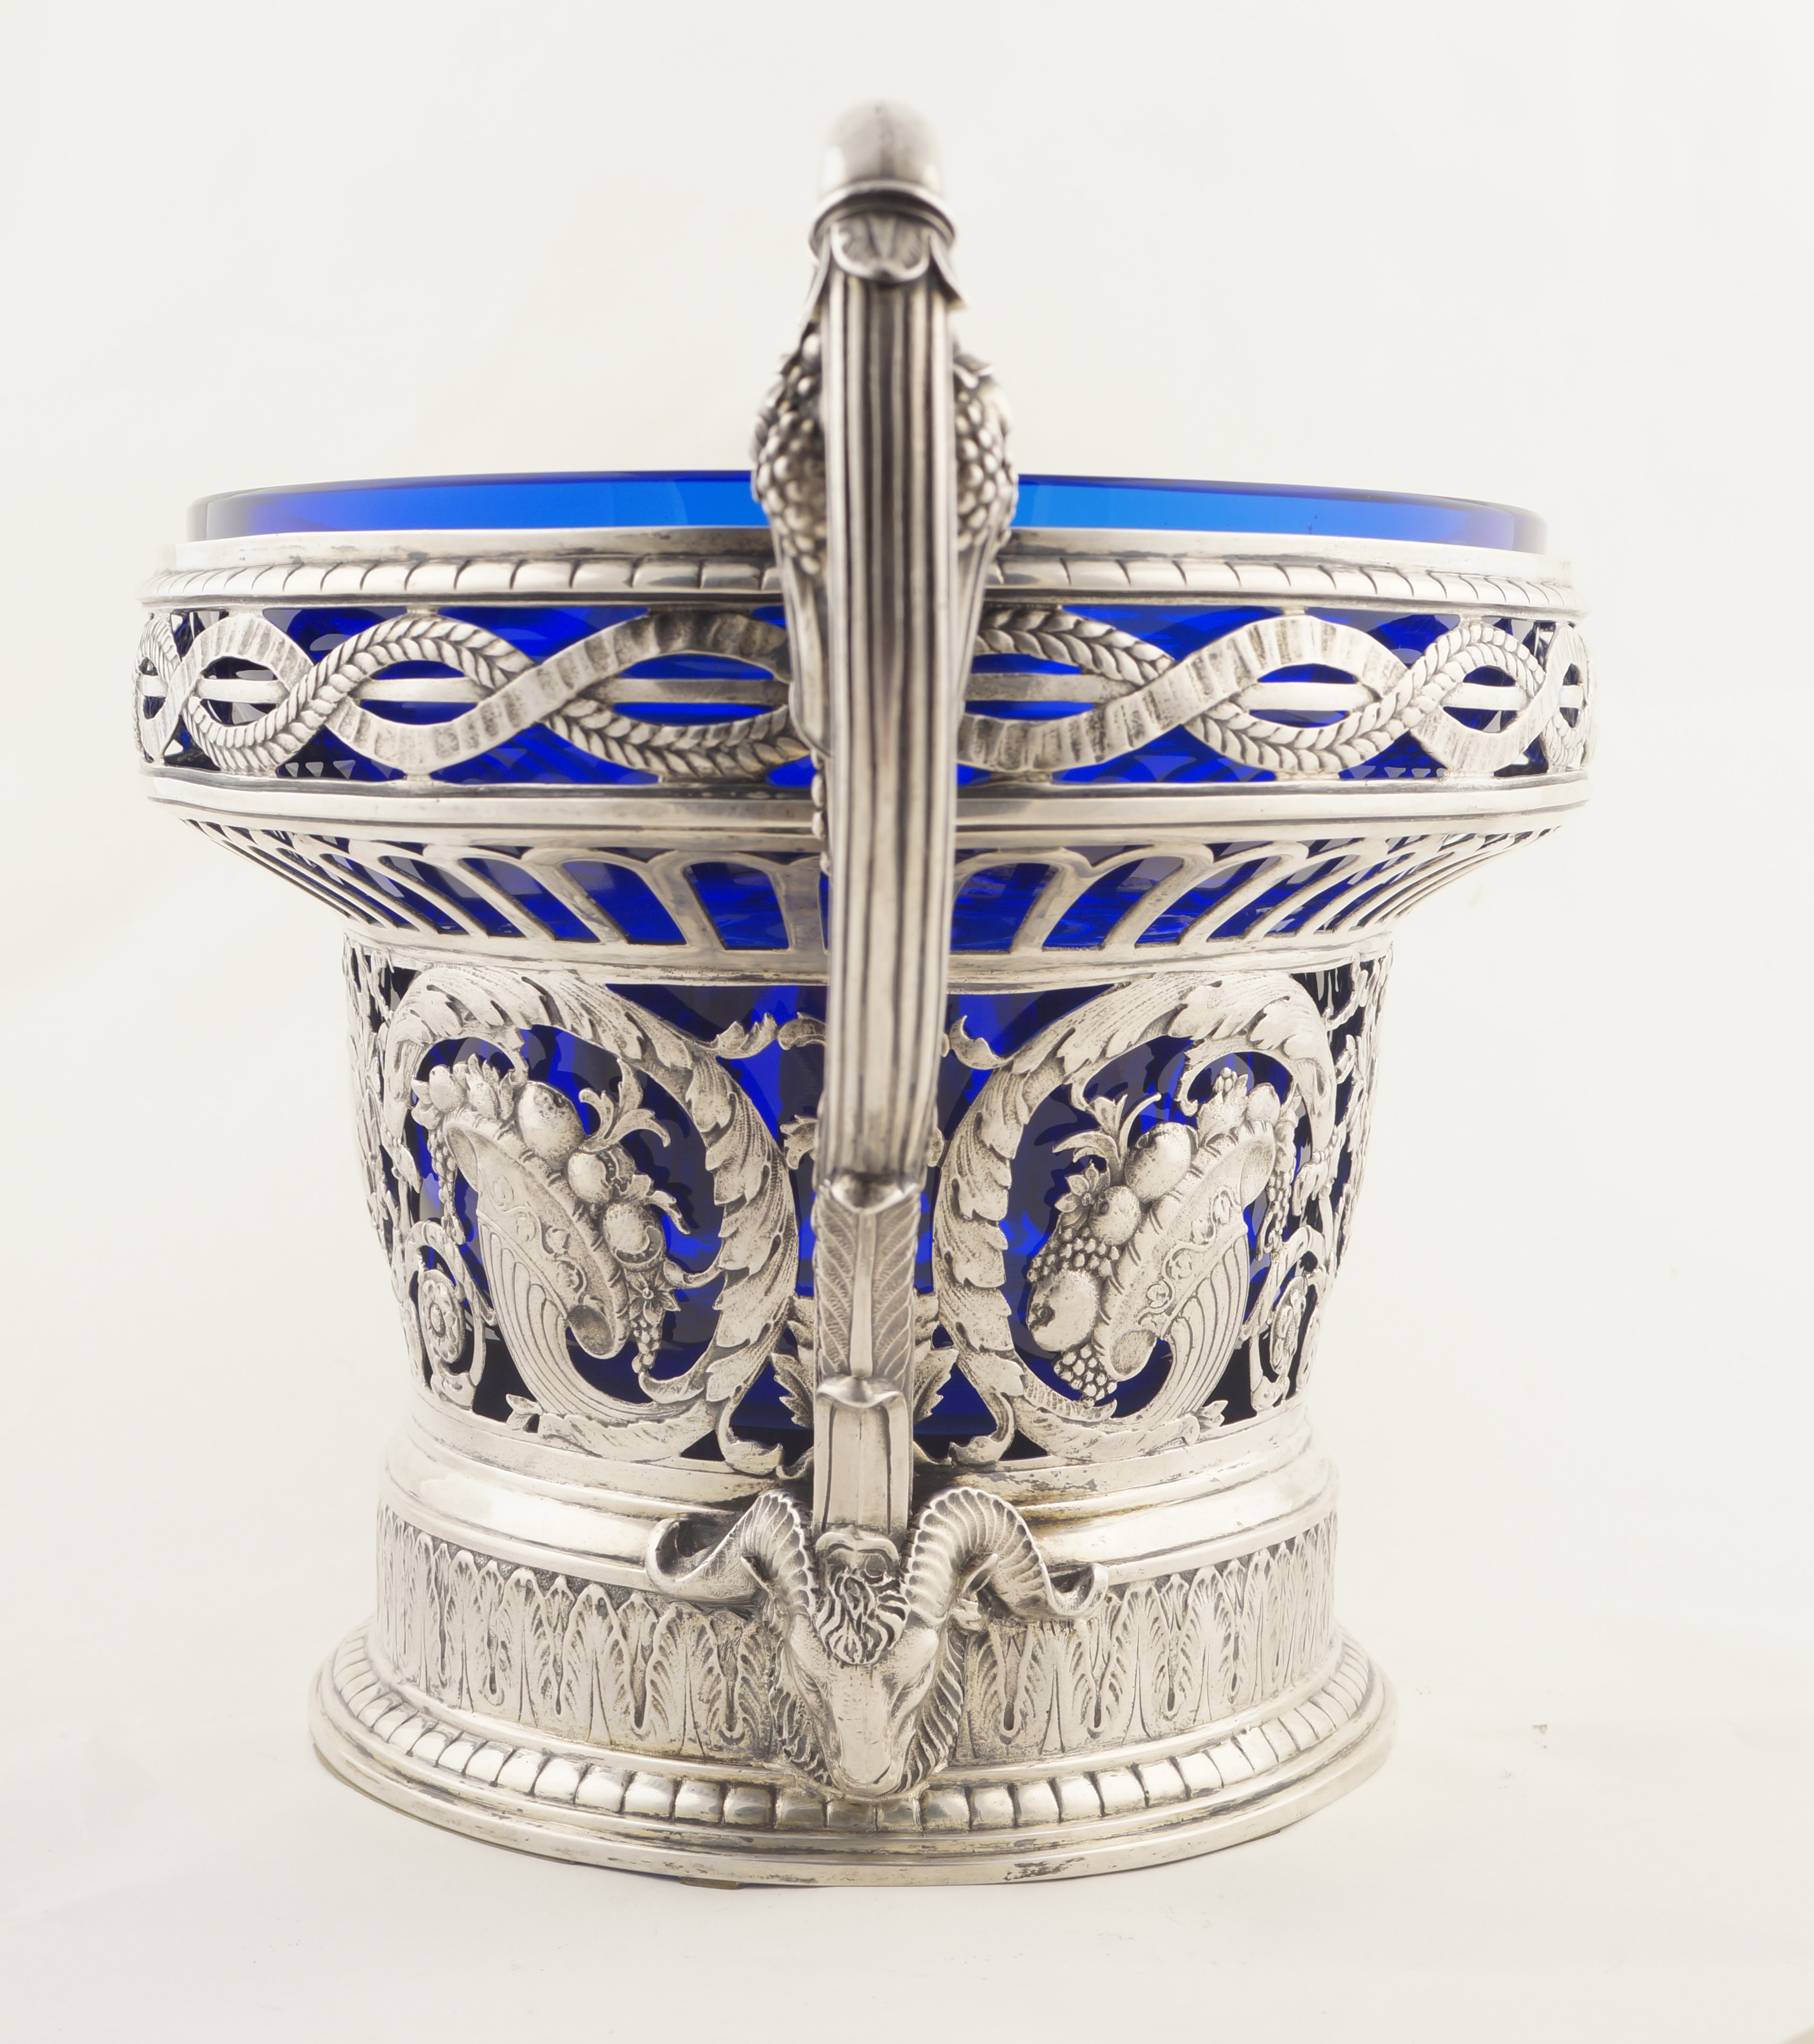 A German silver tray Silversmith Carl Schnauffer, repoussé and chasing decorations, blue glass - Image 2 of 3